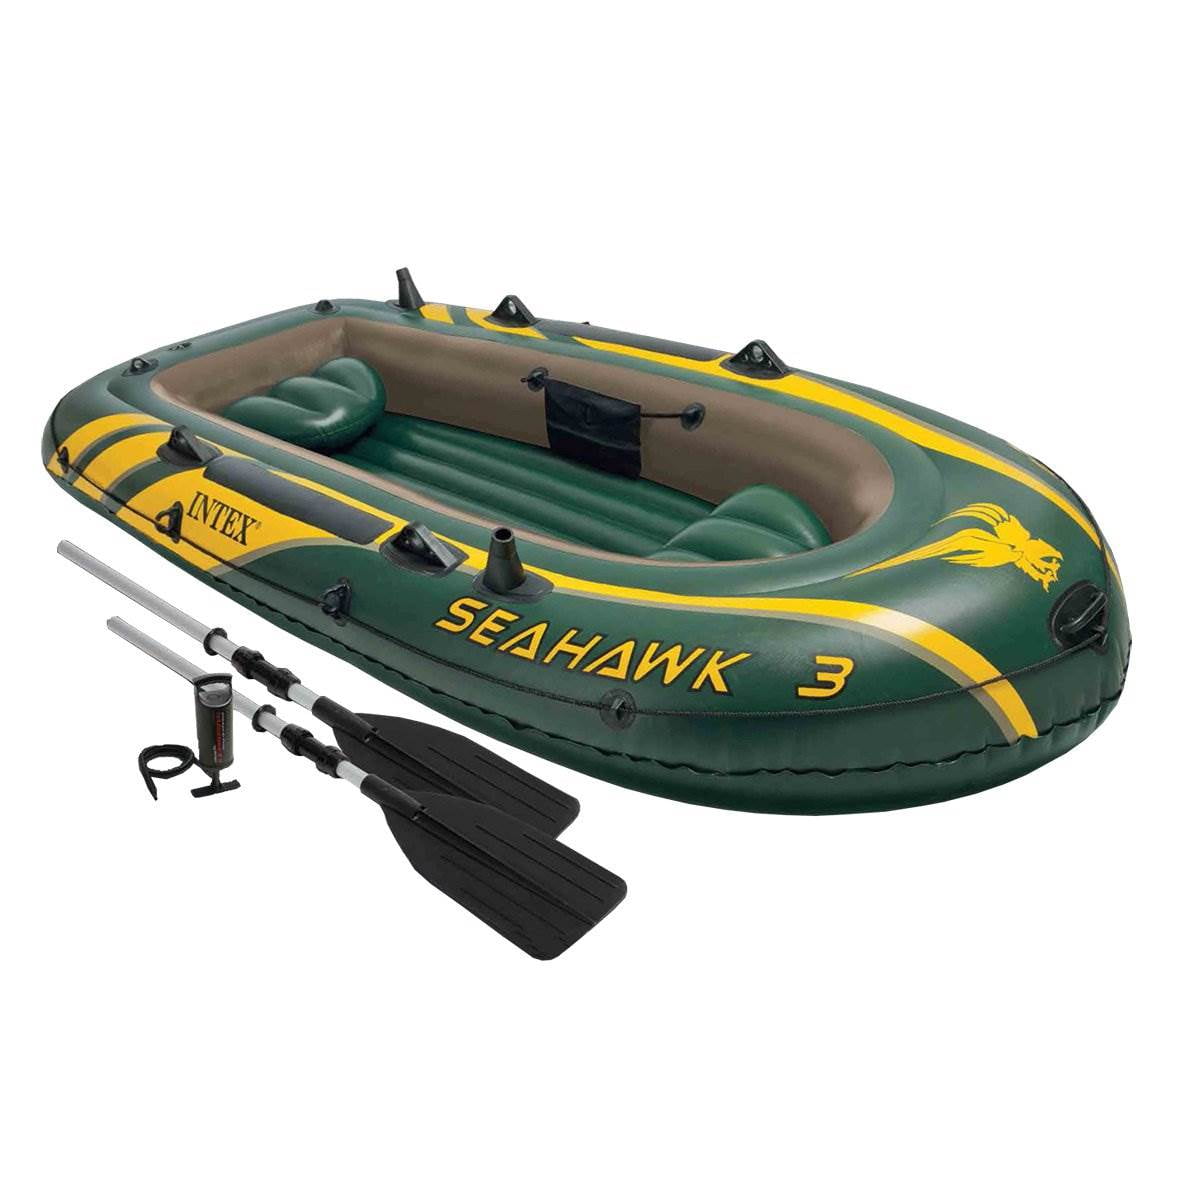 Intex Seahawk 3 Person Heavy Duty Inflatable Rafting and Fishing Boat Set w/ 2 Aluminum Oars, High Output Air Pump, and Carry Bag, 790 Pound Capacity